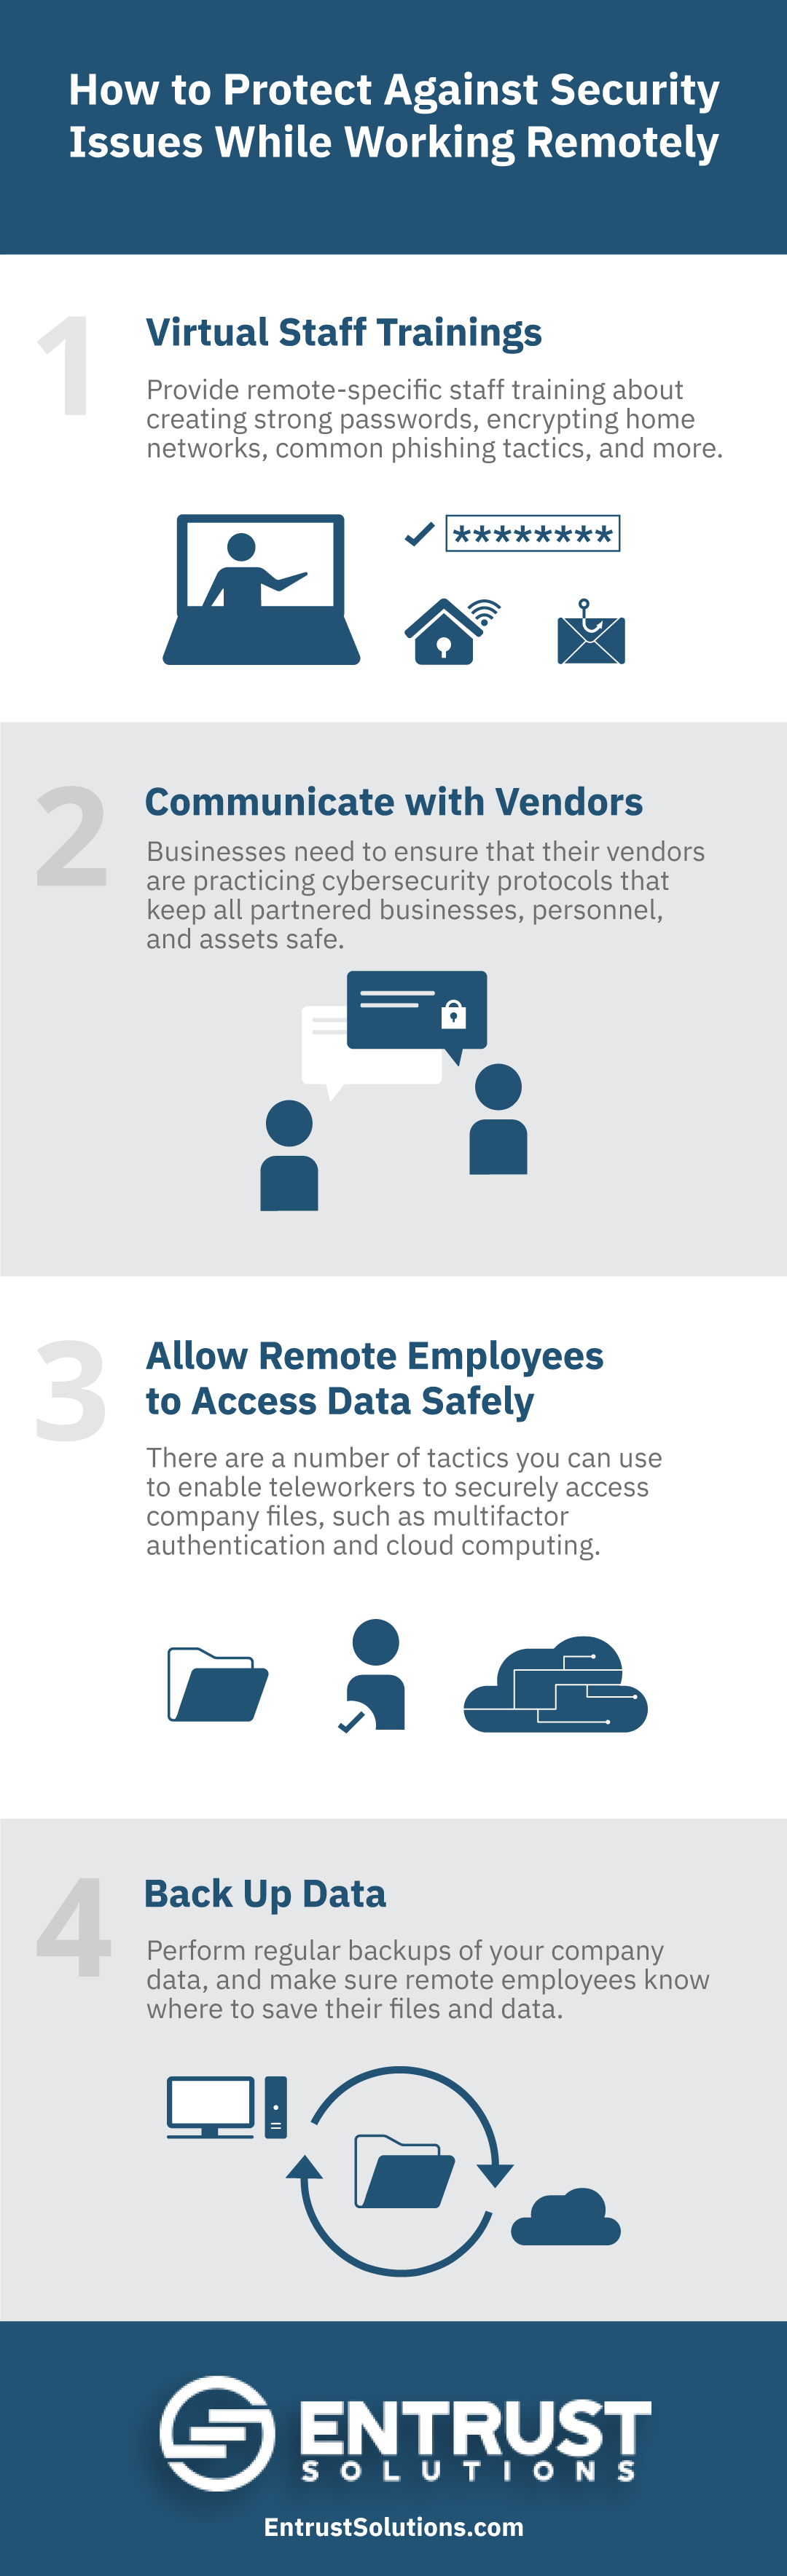 Our best tips for addressing common security issues with working remotely include: 1. Virtual Staff Trainings, 2. Communicate with Vendors, 3. Allow Remote Employees to Access Data Safely, 4. Back Up Data.